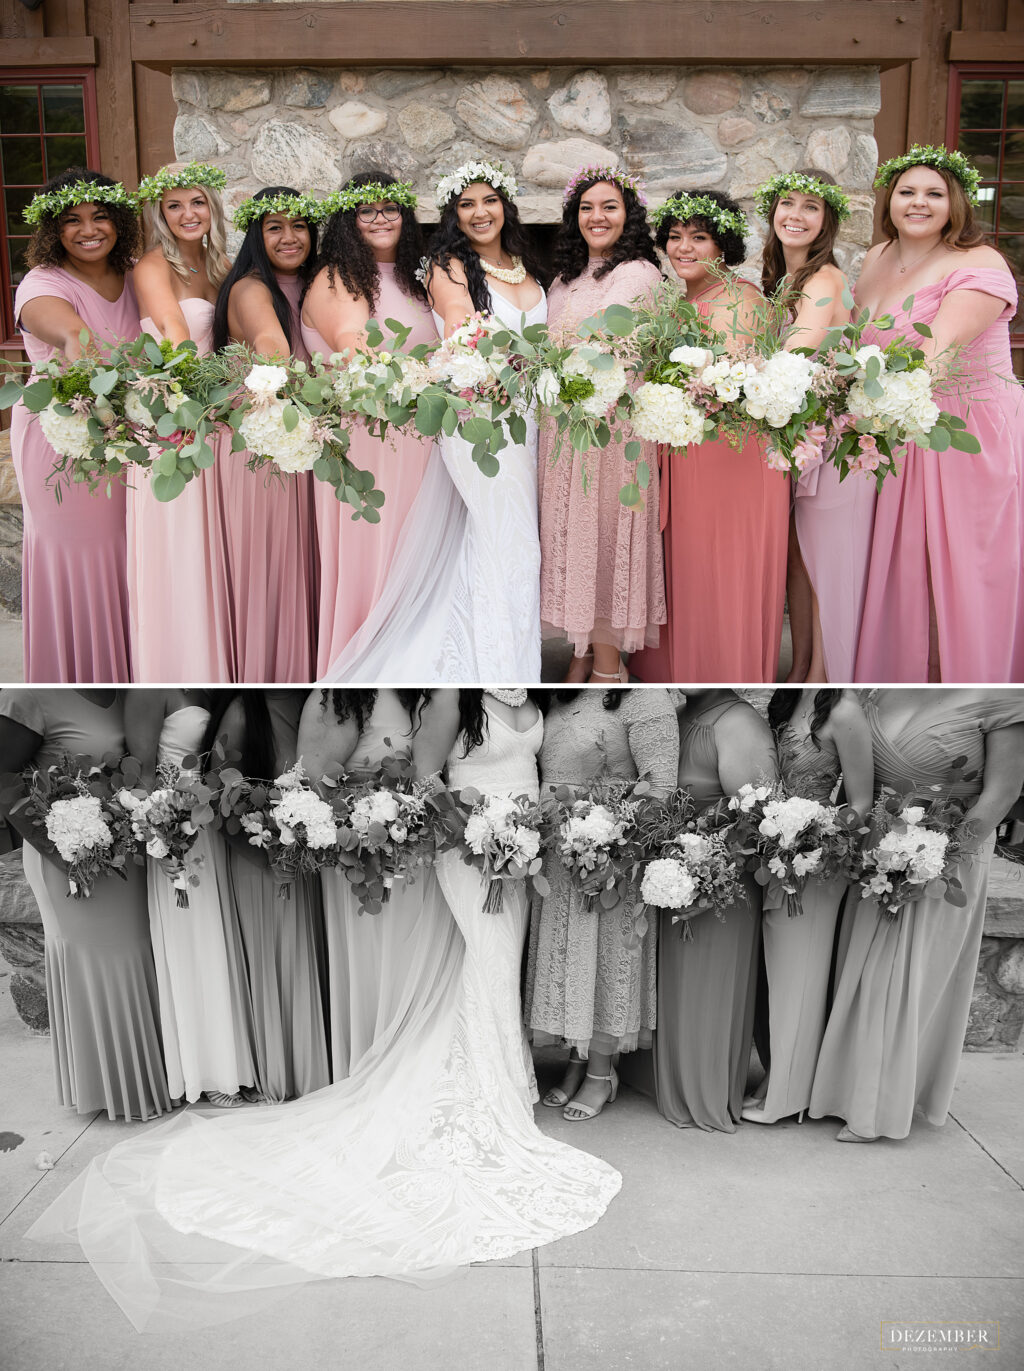 Bridemaids hold out bouquets